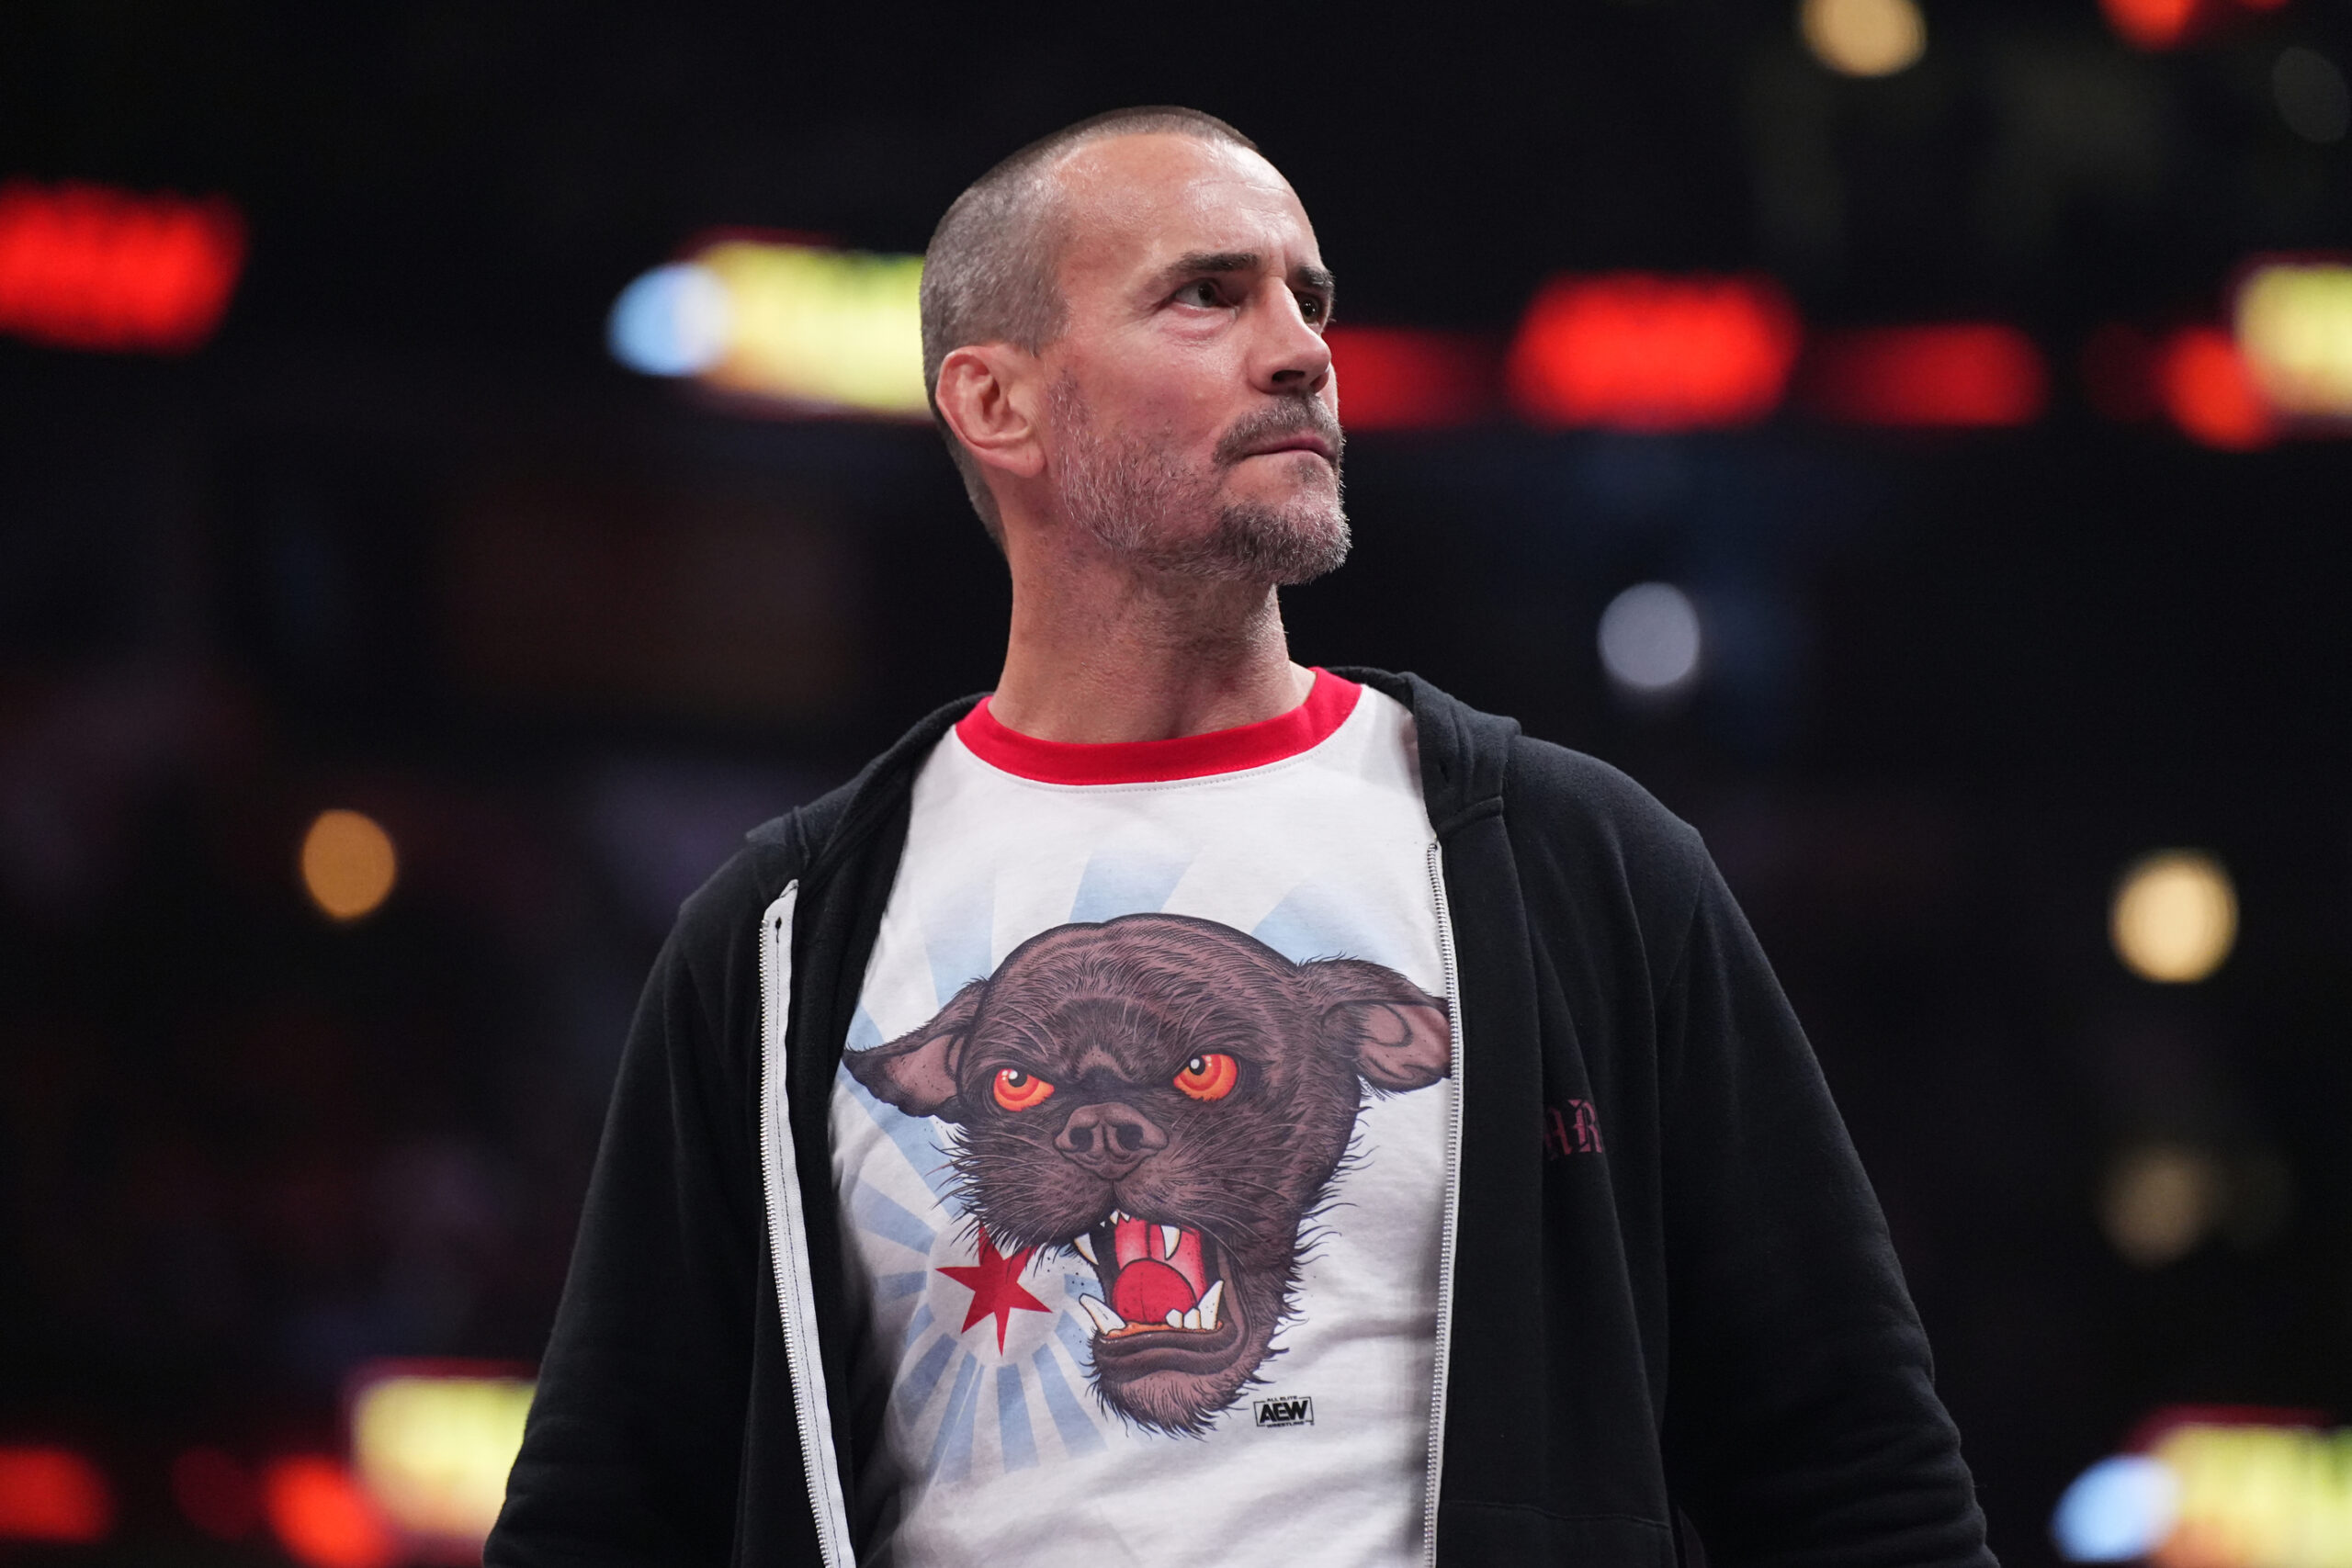 AEW Collision results: CM Punk tears into 'soft' critics and other  wrestlers during explosive return - WTX News